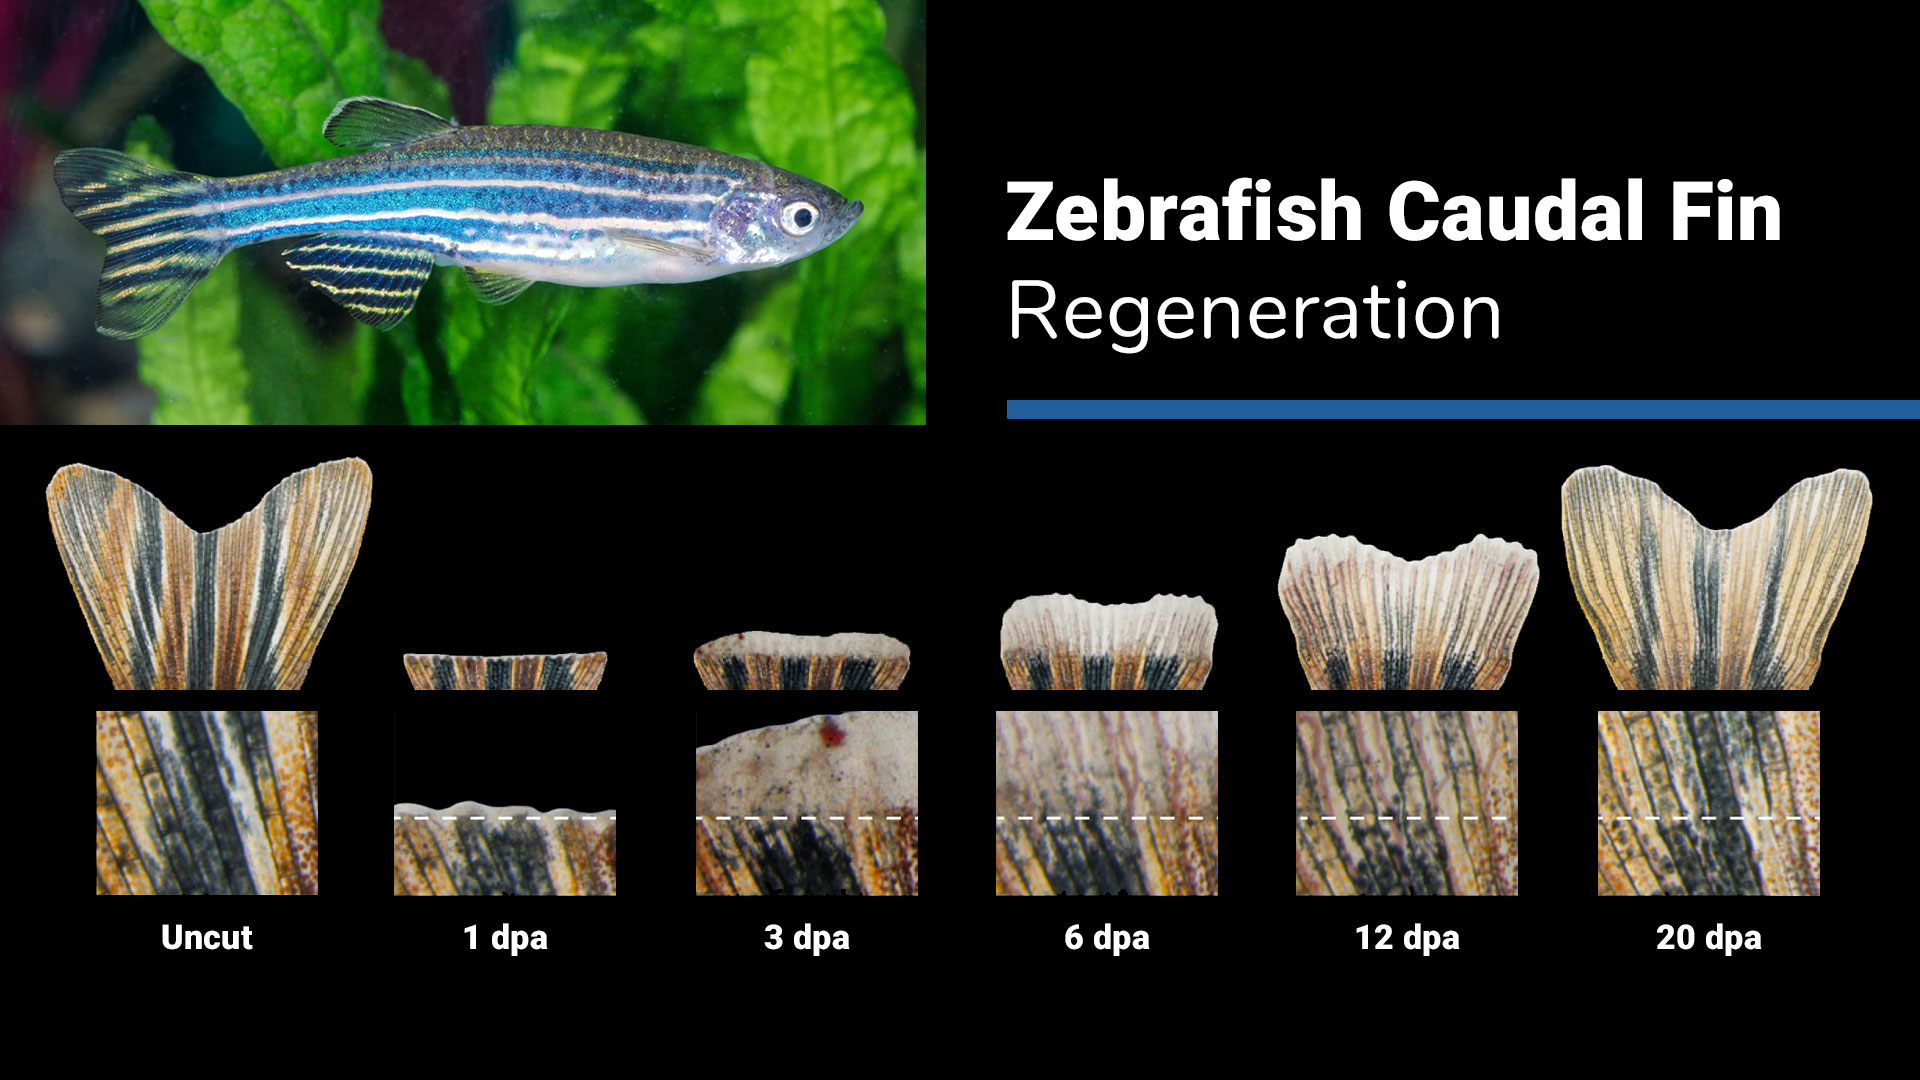 Zebrafish Caudal Fin Regeneration: A blue-and-white-striped zebrafish and images of a fin, shown in stages, which was lost and is regenerating or growing back.